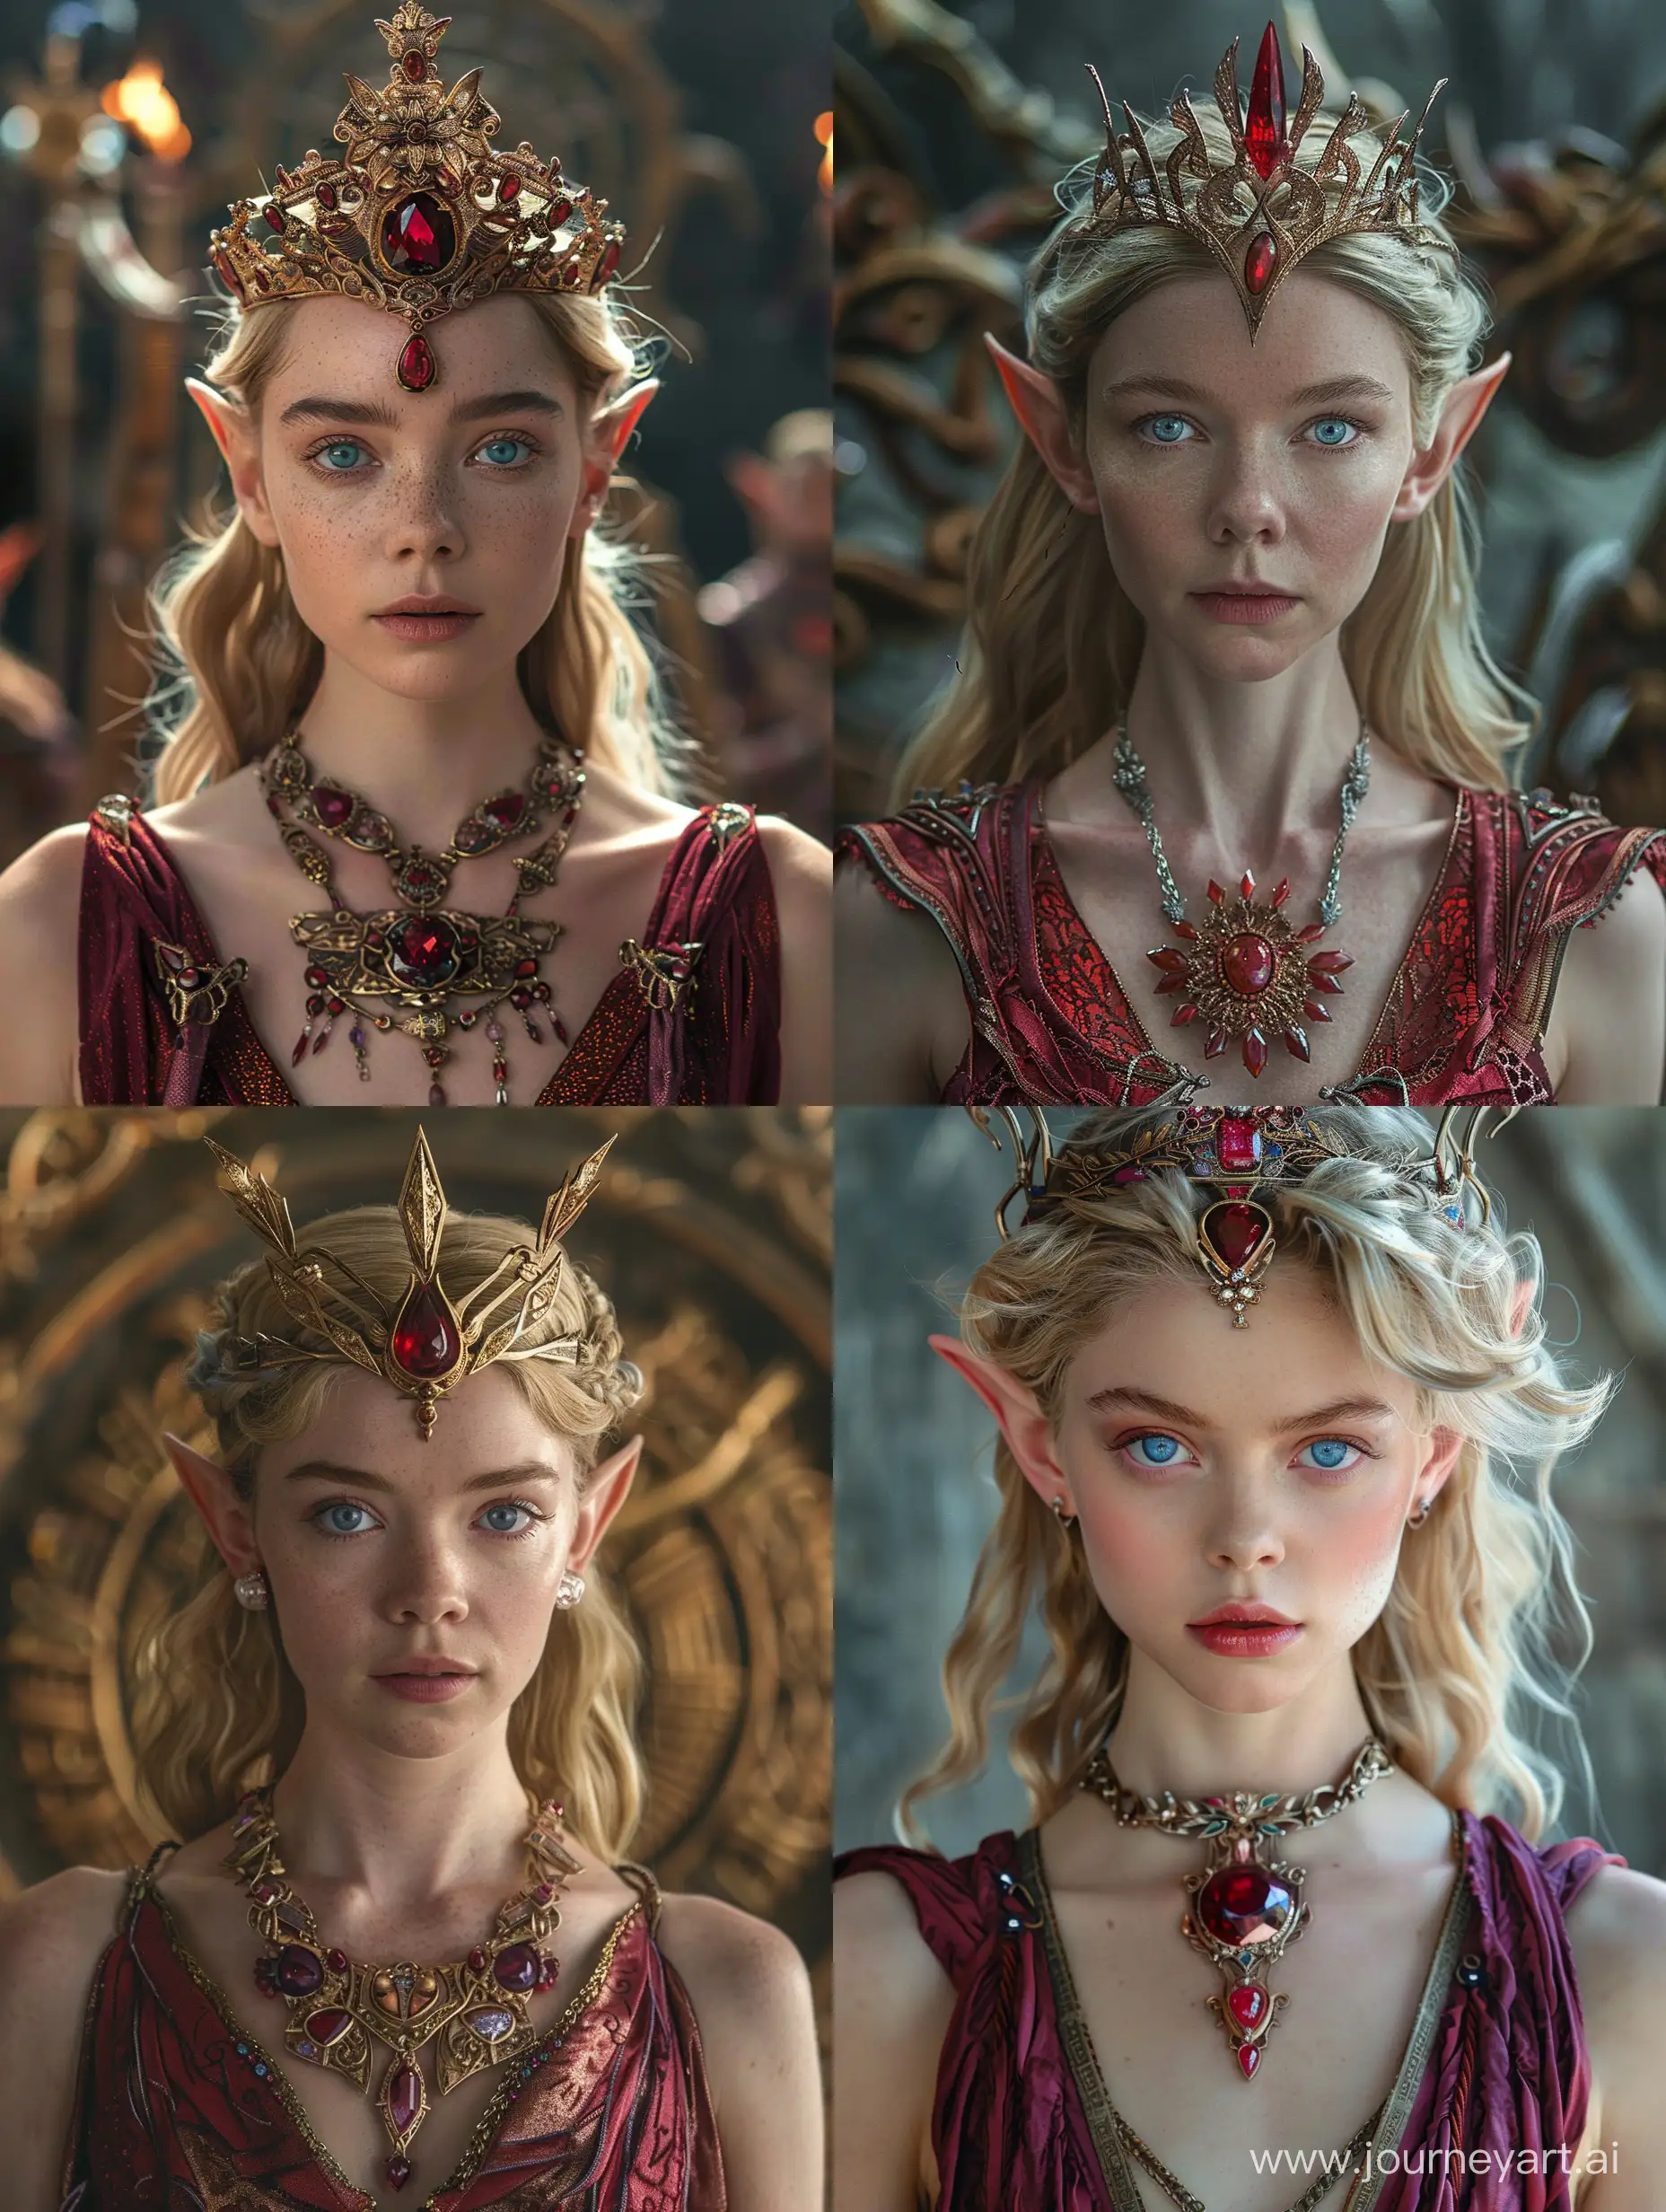 Vanessa Kirby as a youthful elf queen with Sleeveless crimson robes and blue eyes and blonde hair and an elaborate Ruby necklace and tiara